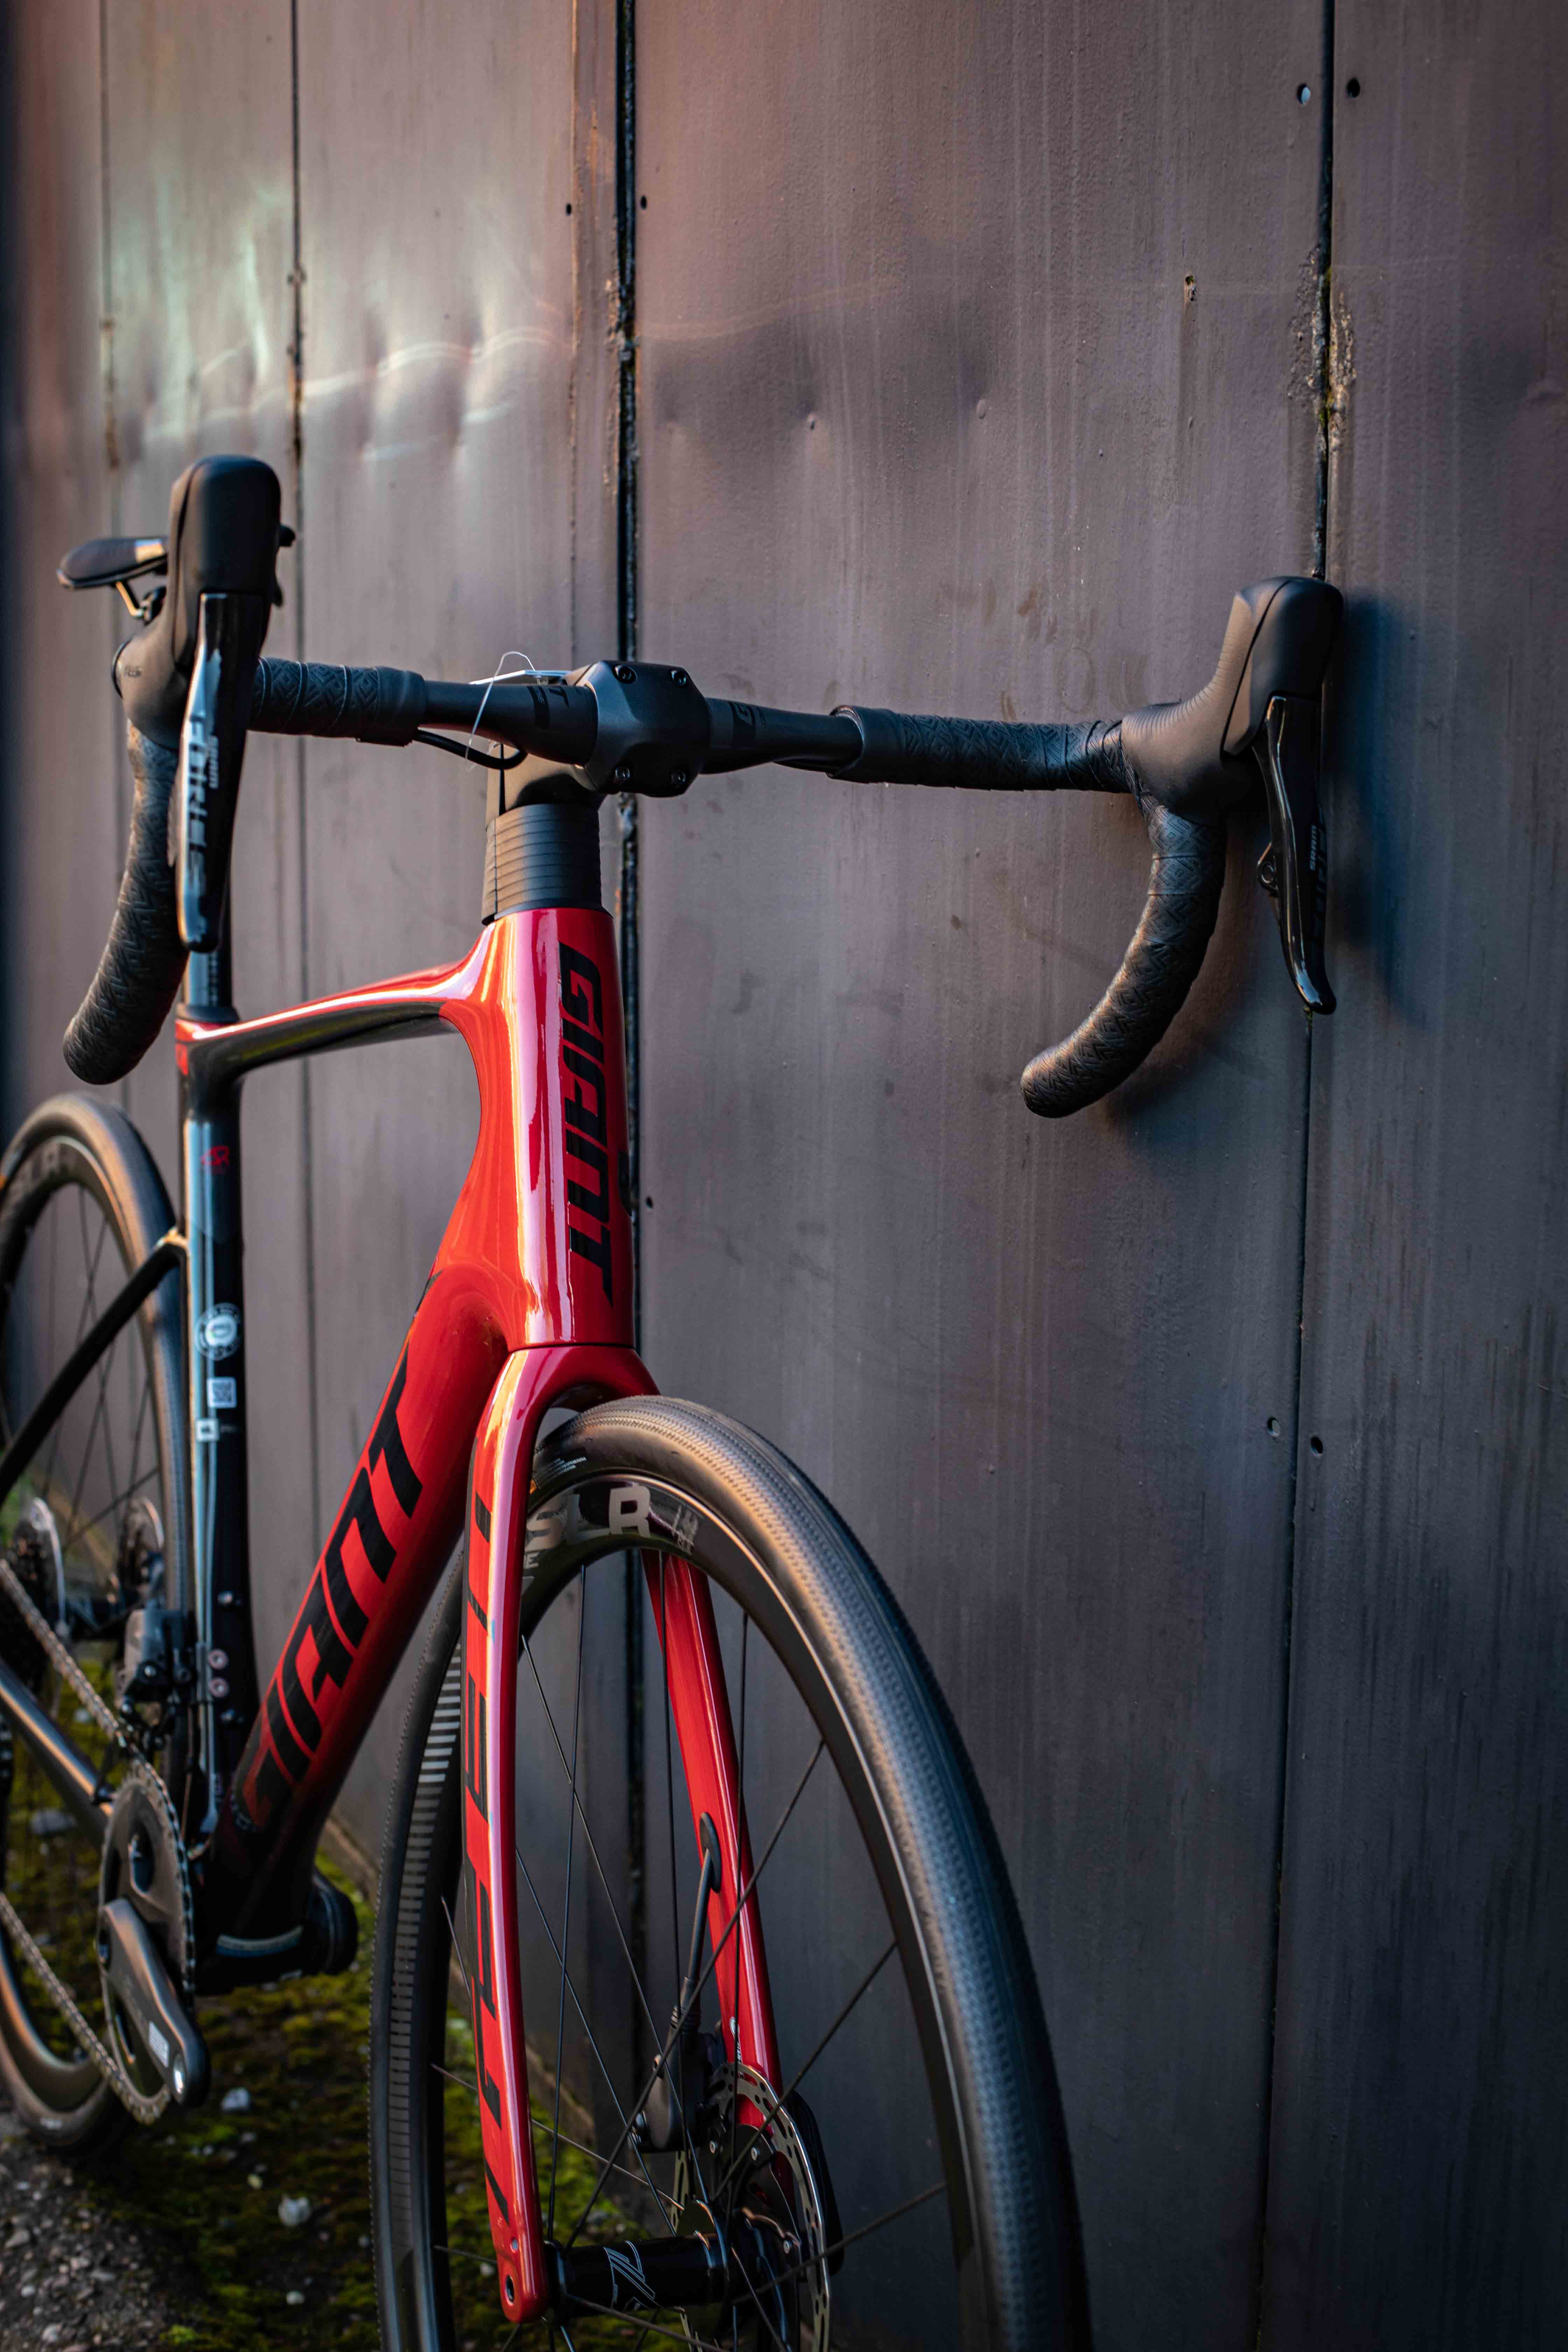 giant defy advanced pro review